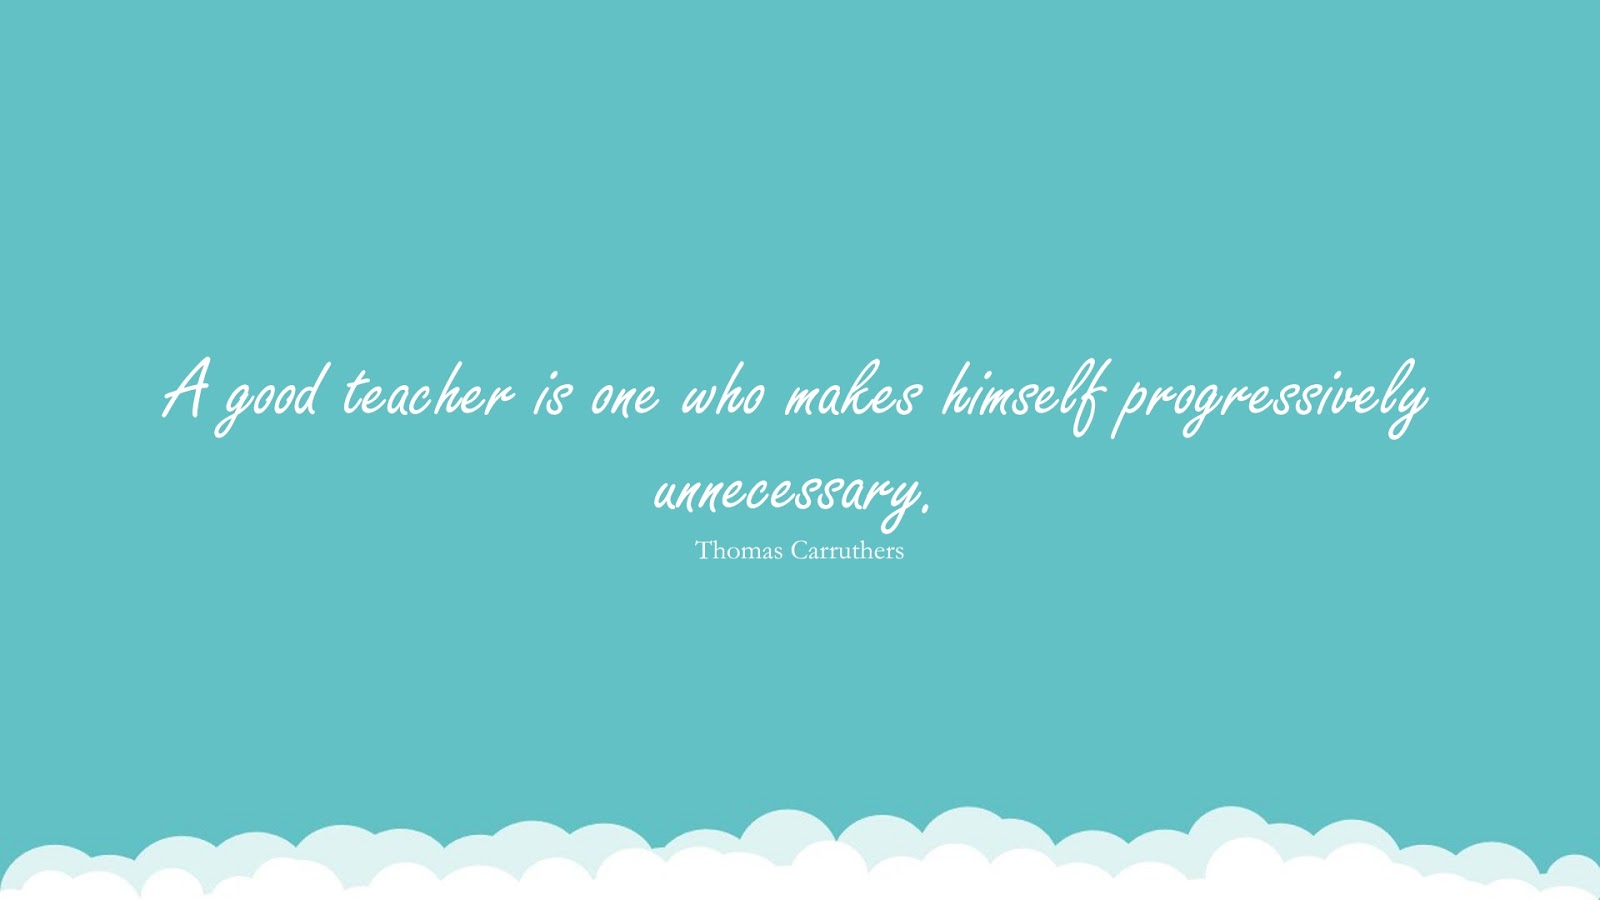 A good teacher is one who makes himself progressively unnecessary. (Thomas Carruthers);  #EducationQuotes